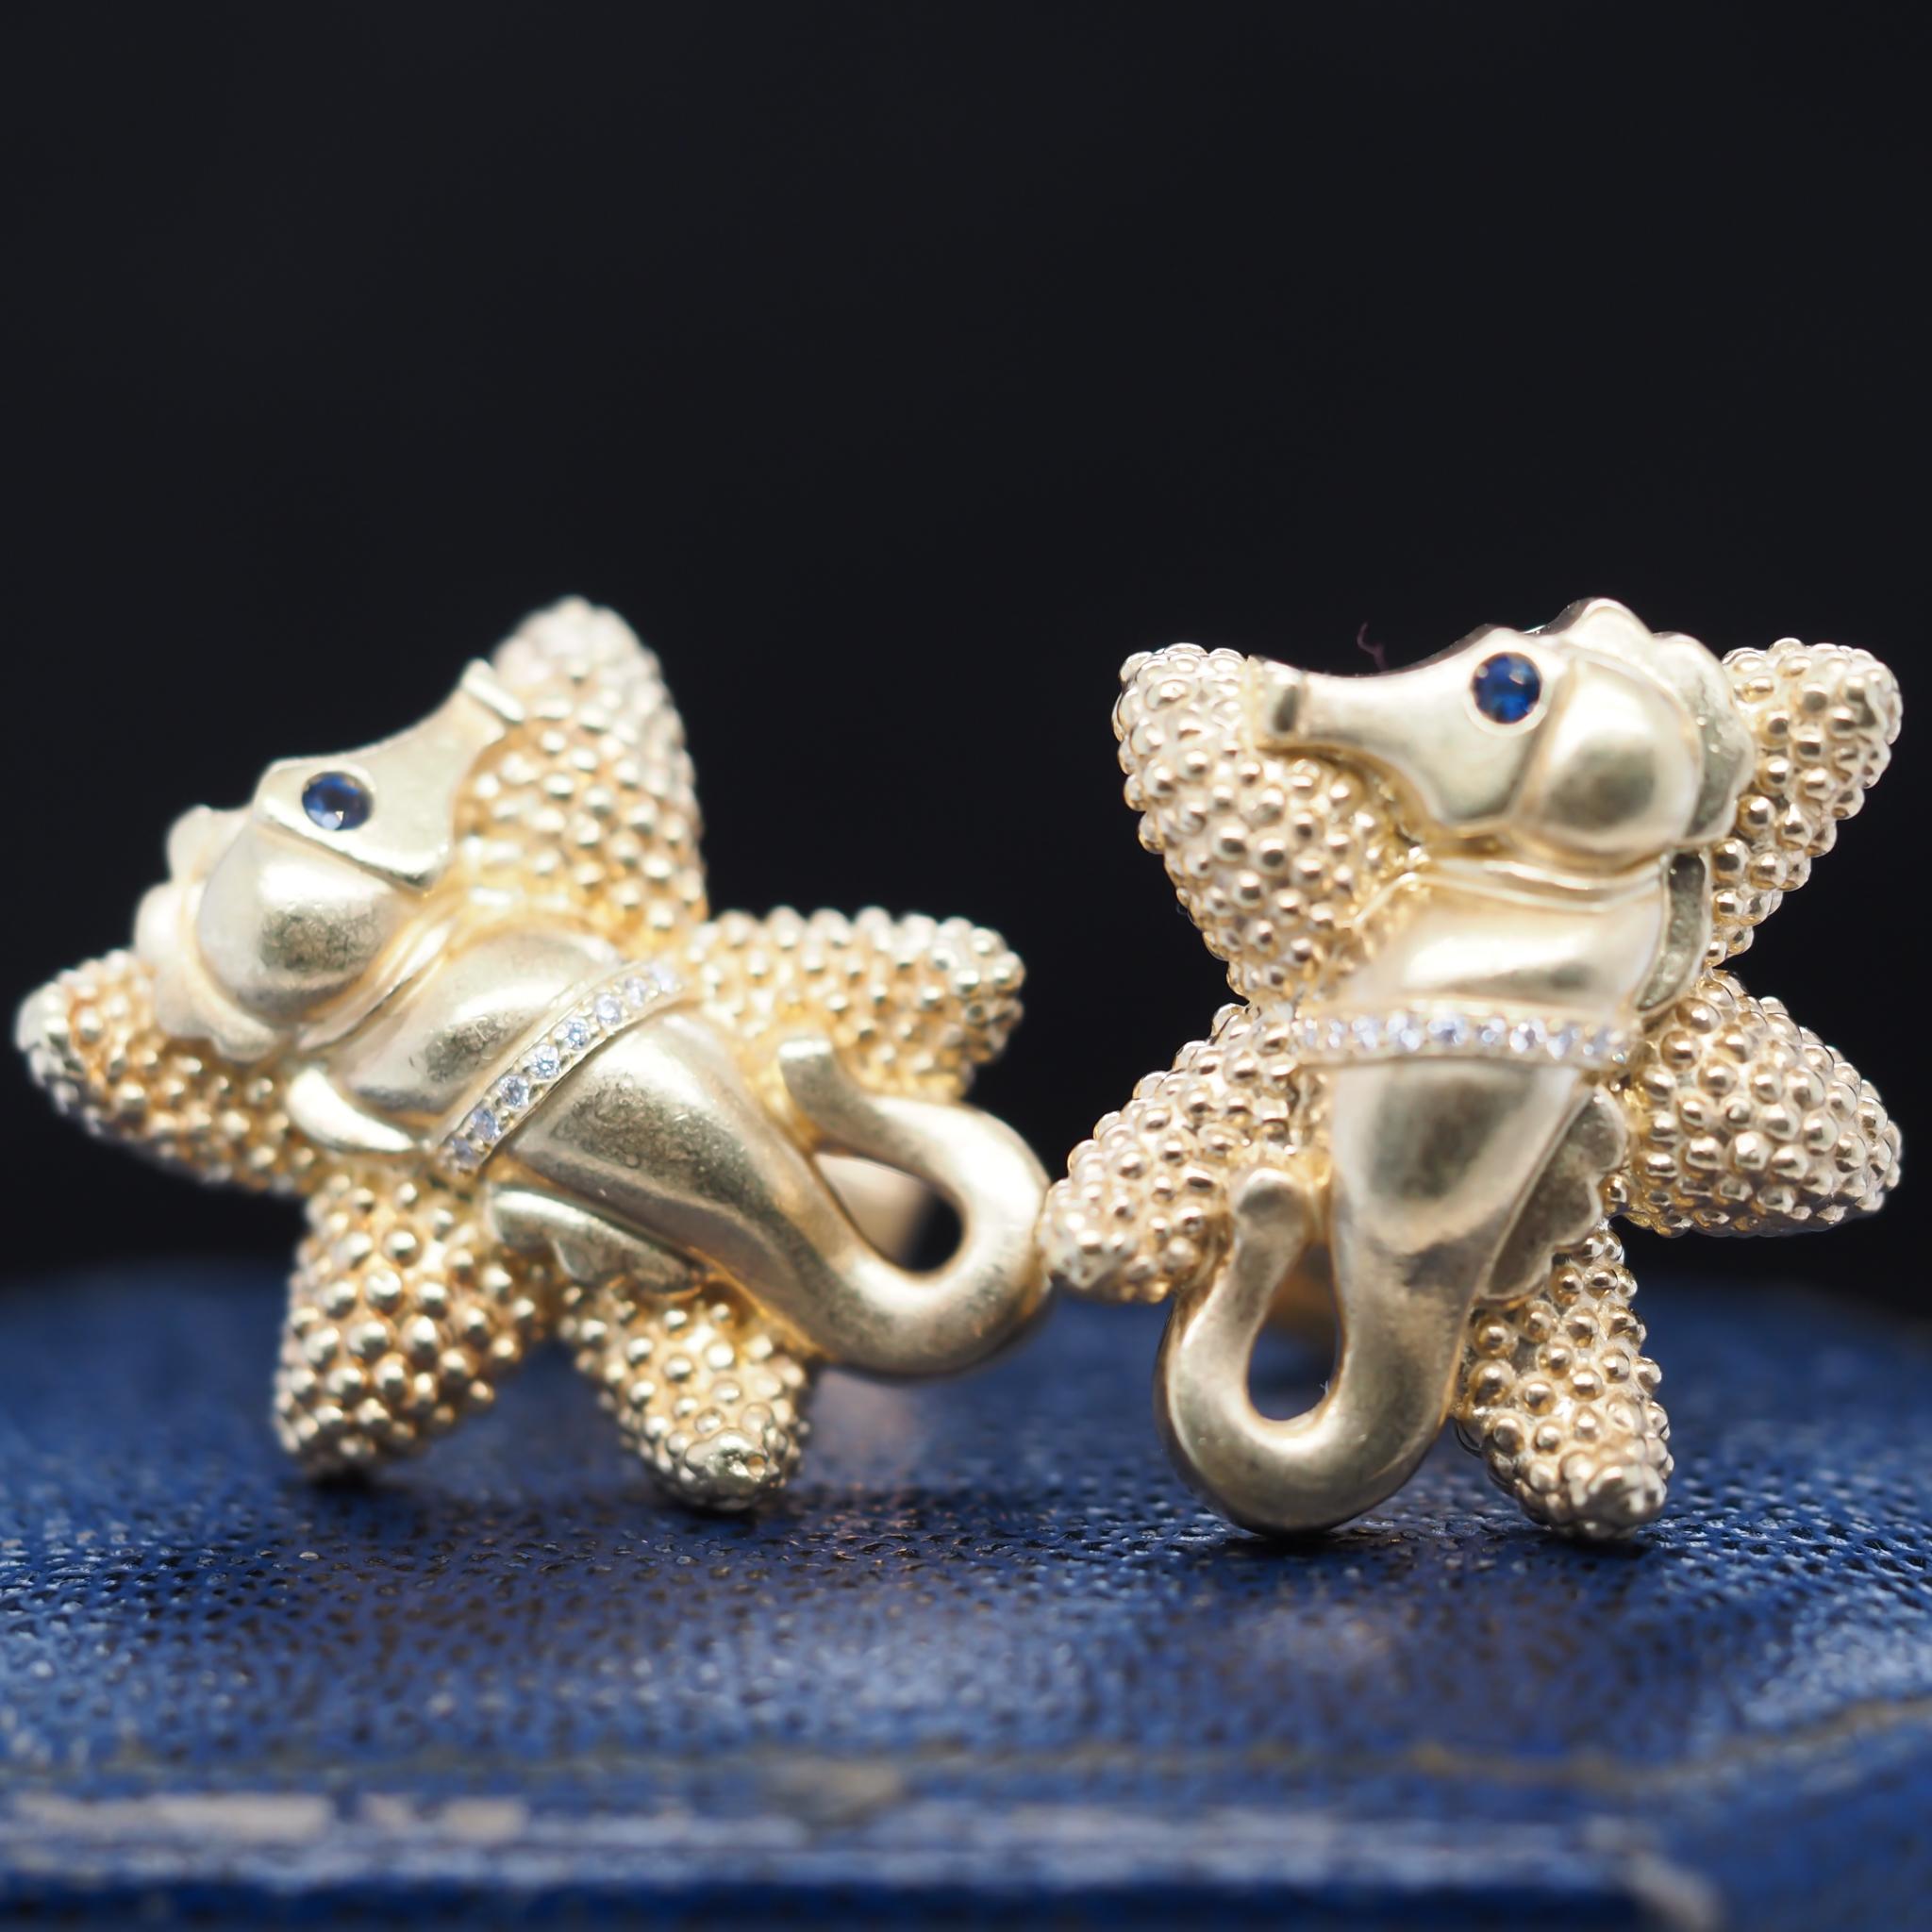 Metal Type: 18K Yellow and 14K Yellow Gold Hinge [Hallmarked, and Tested]
Weight: 22.5 grams

Natural sapphire eyes and natural diamonds running across both cufflinks.

Measurement: Seahorse measures 1 inch long

Condition: Excellent